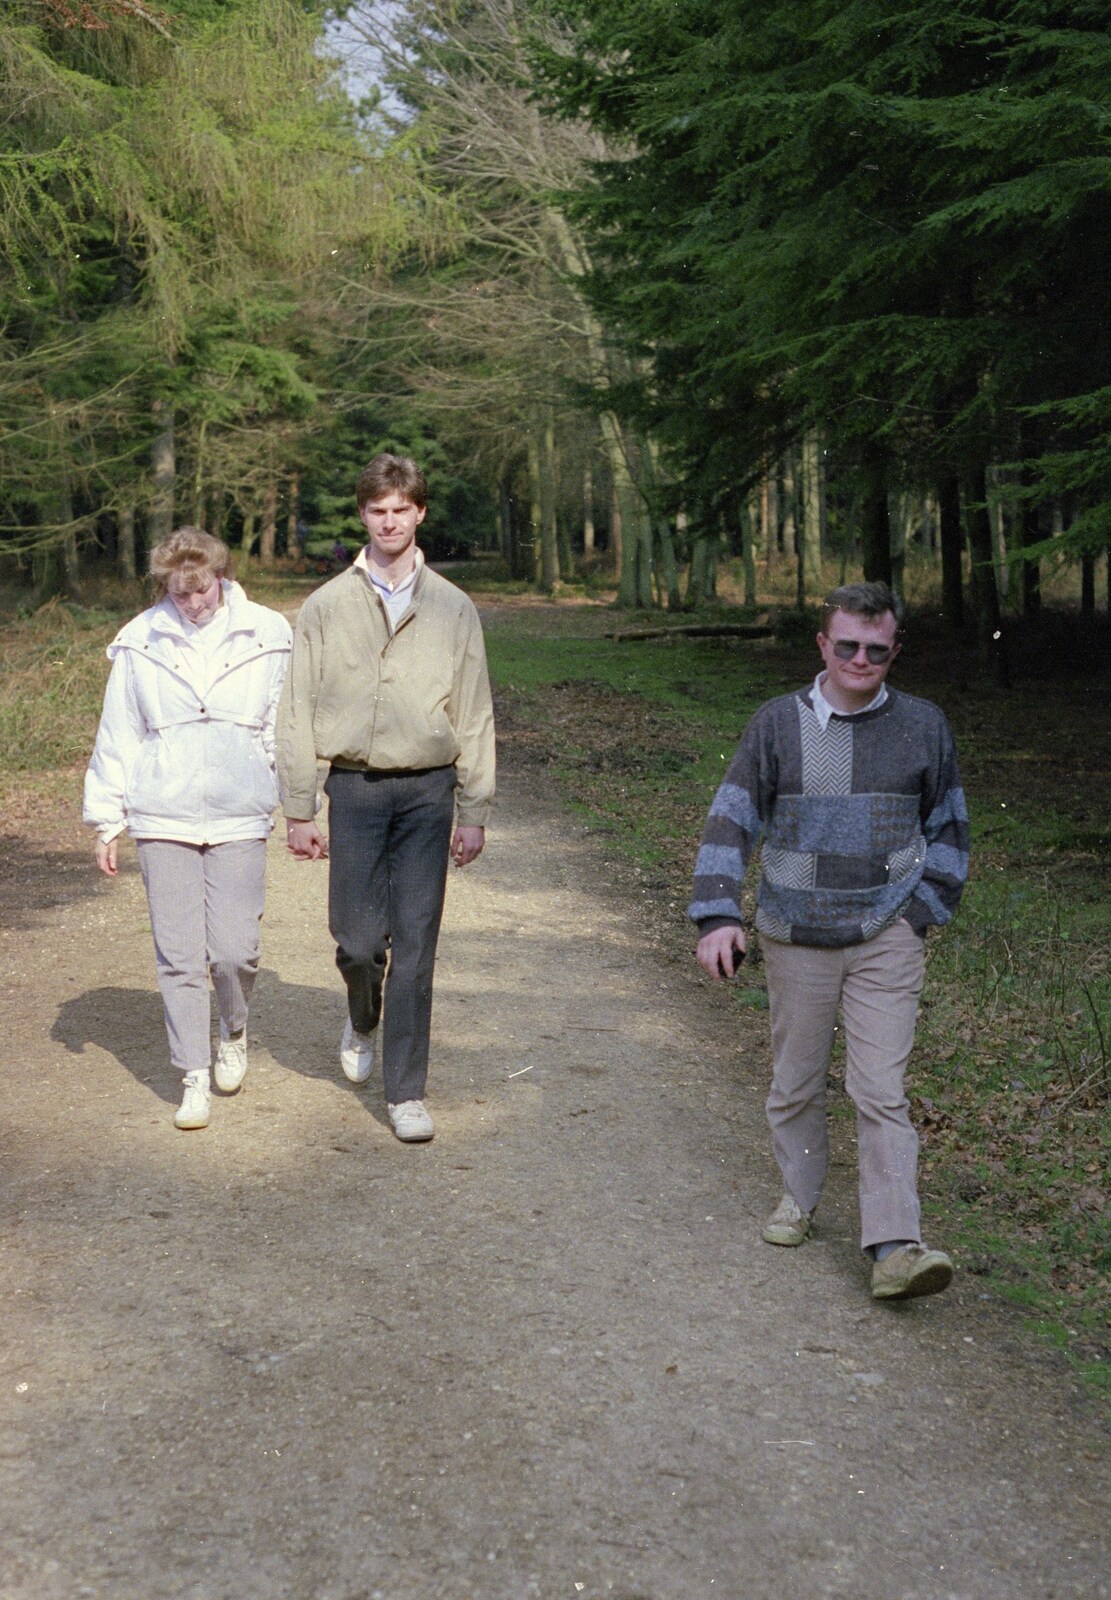 Maria, Sean and Hamish from A Walk in the New Forest, Hampshire - 27th July 1989